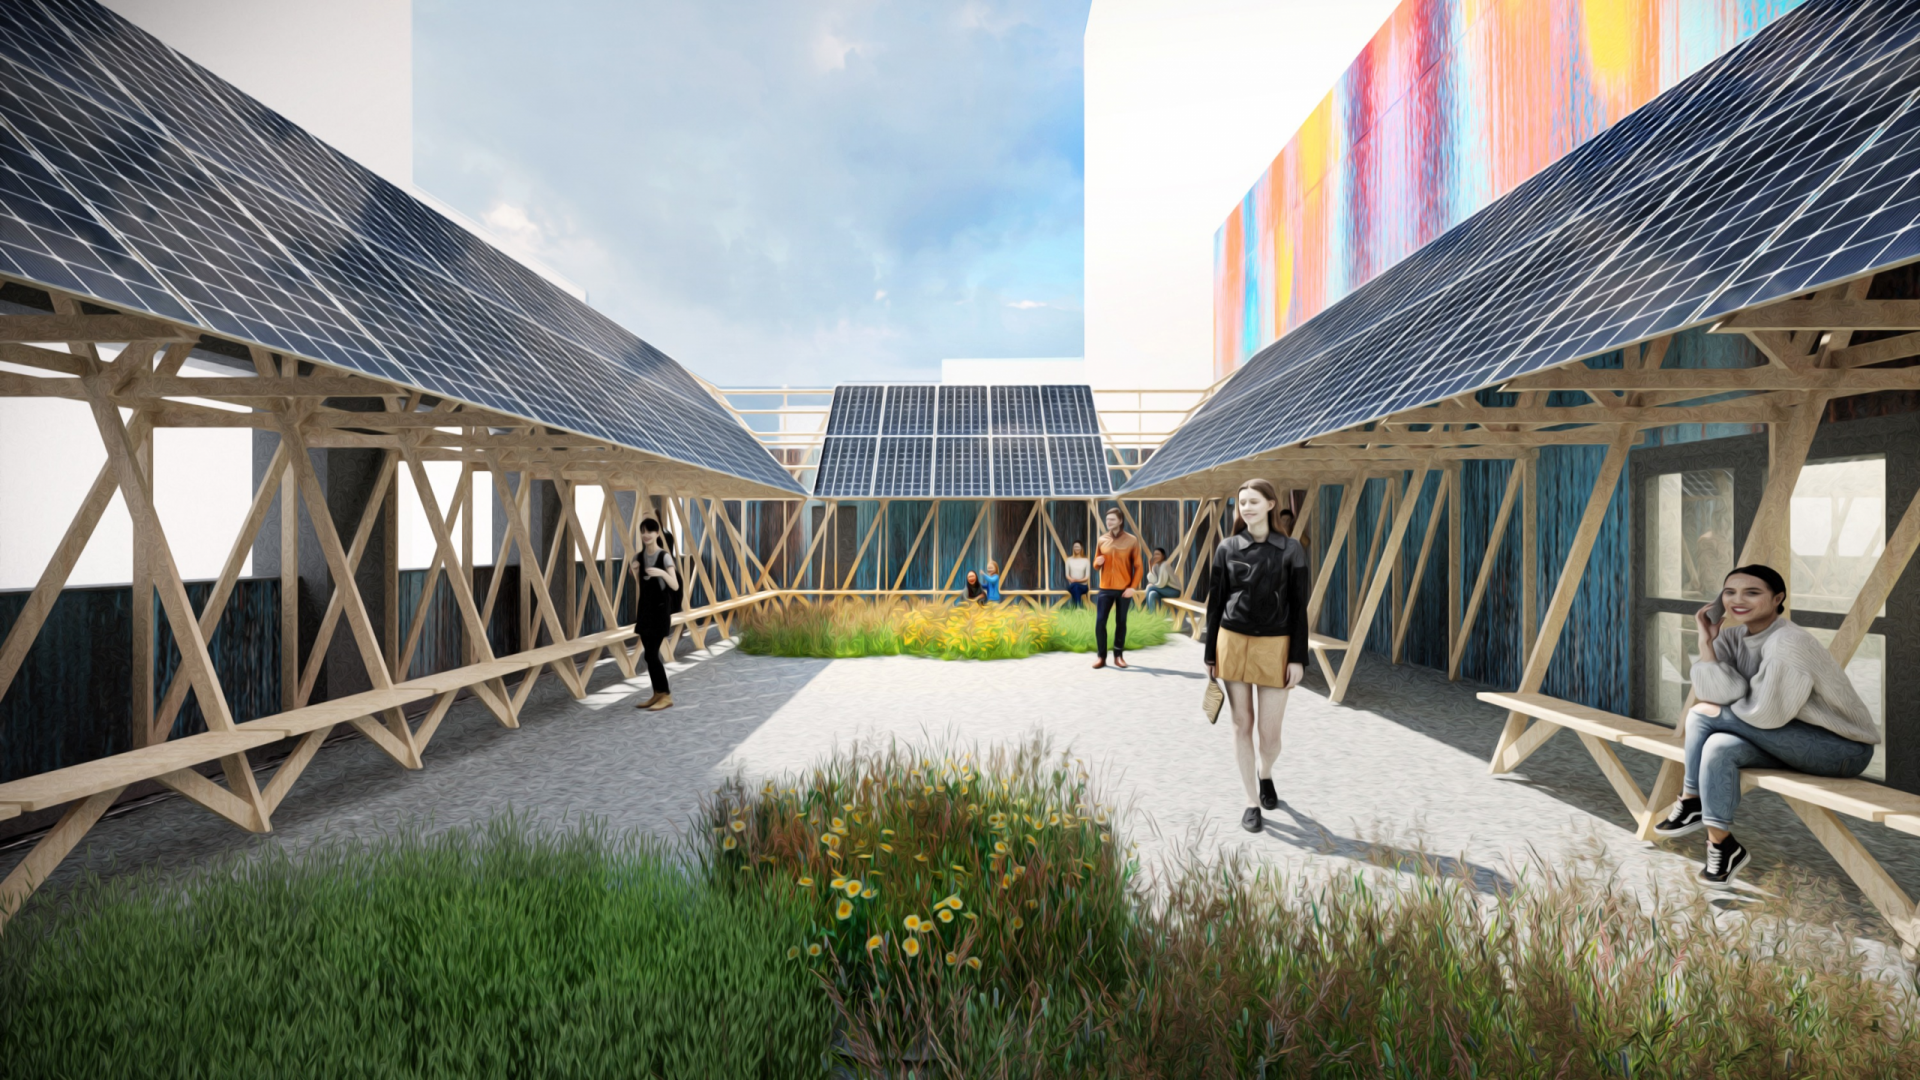 Computer render of a roof top garden with elevated solar panels around the perimeter creating awnings.